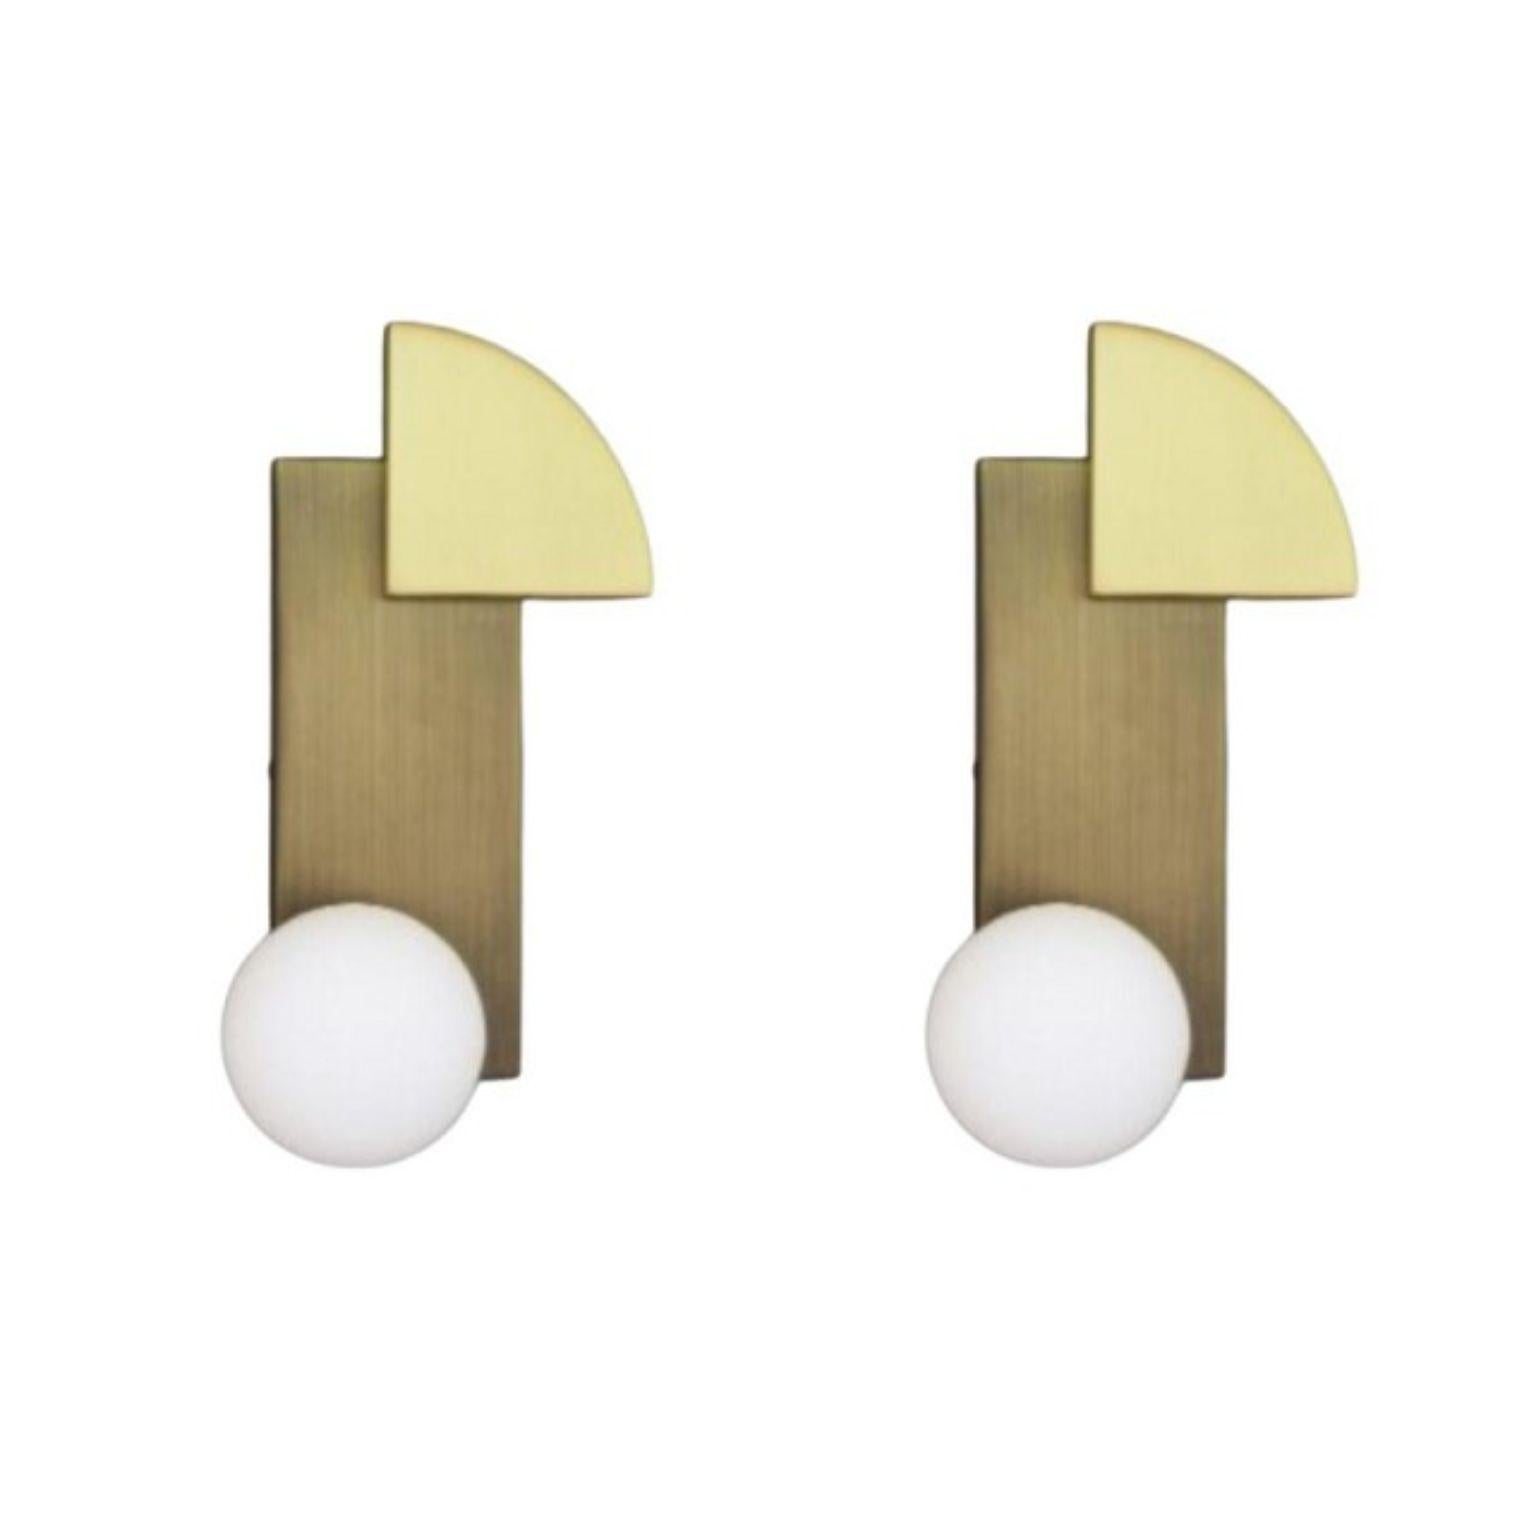 Set of 2 quadrant and sphere wall lights by Square in Circle
Dimensions: D 11.6 x W 16.4 x H 31 cm
Materials:Brushed brass/ medium bronze/ opaque glass
Other finishes available.

This unique wall light is designed from three geometric forms: a